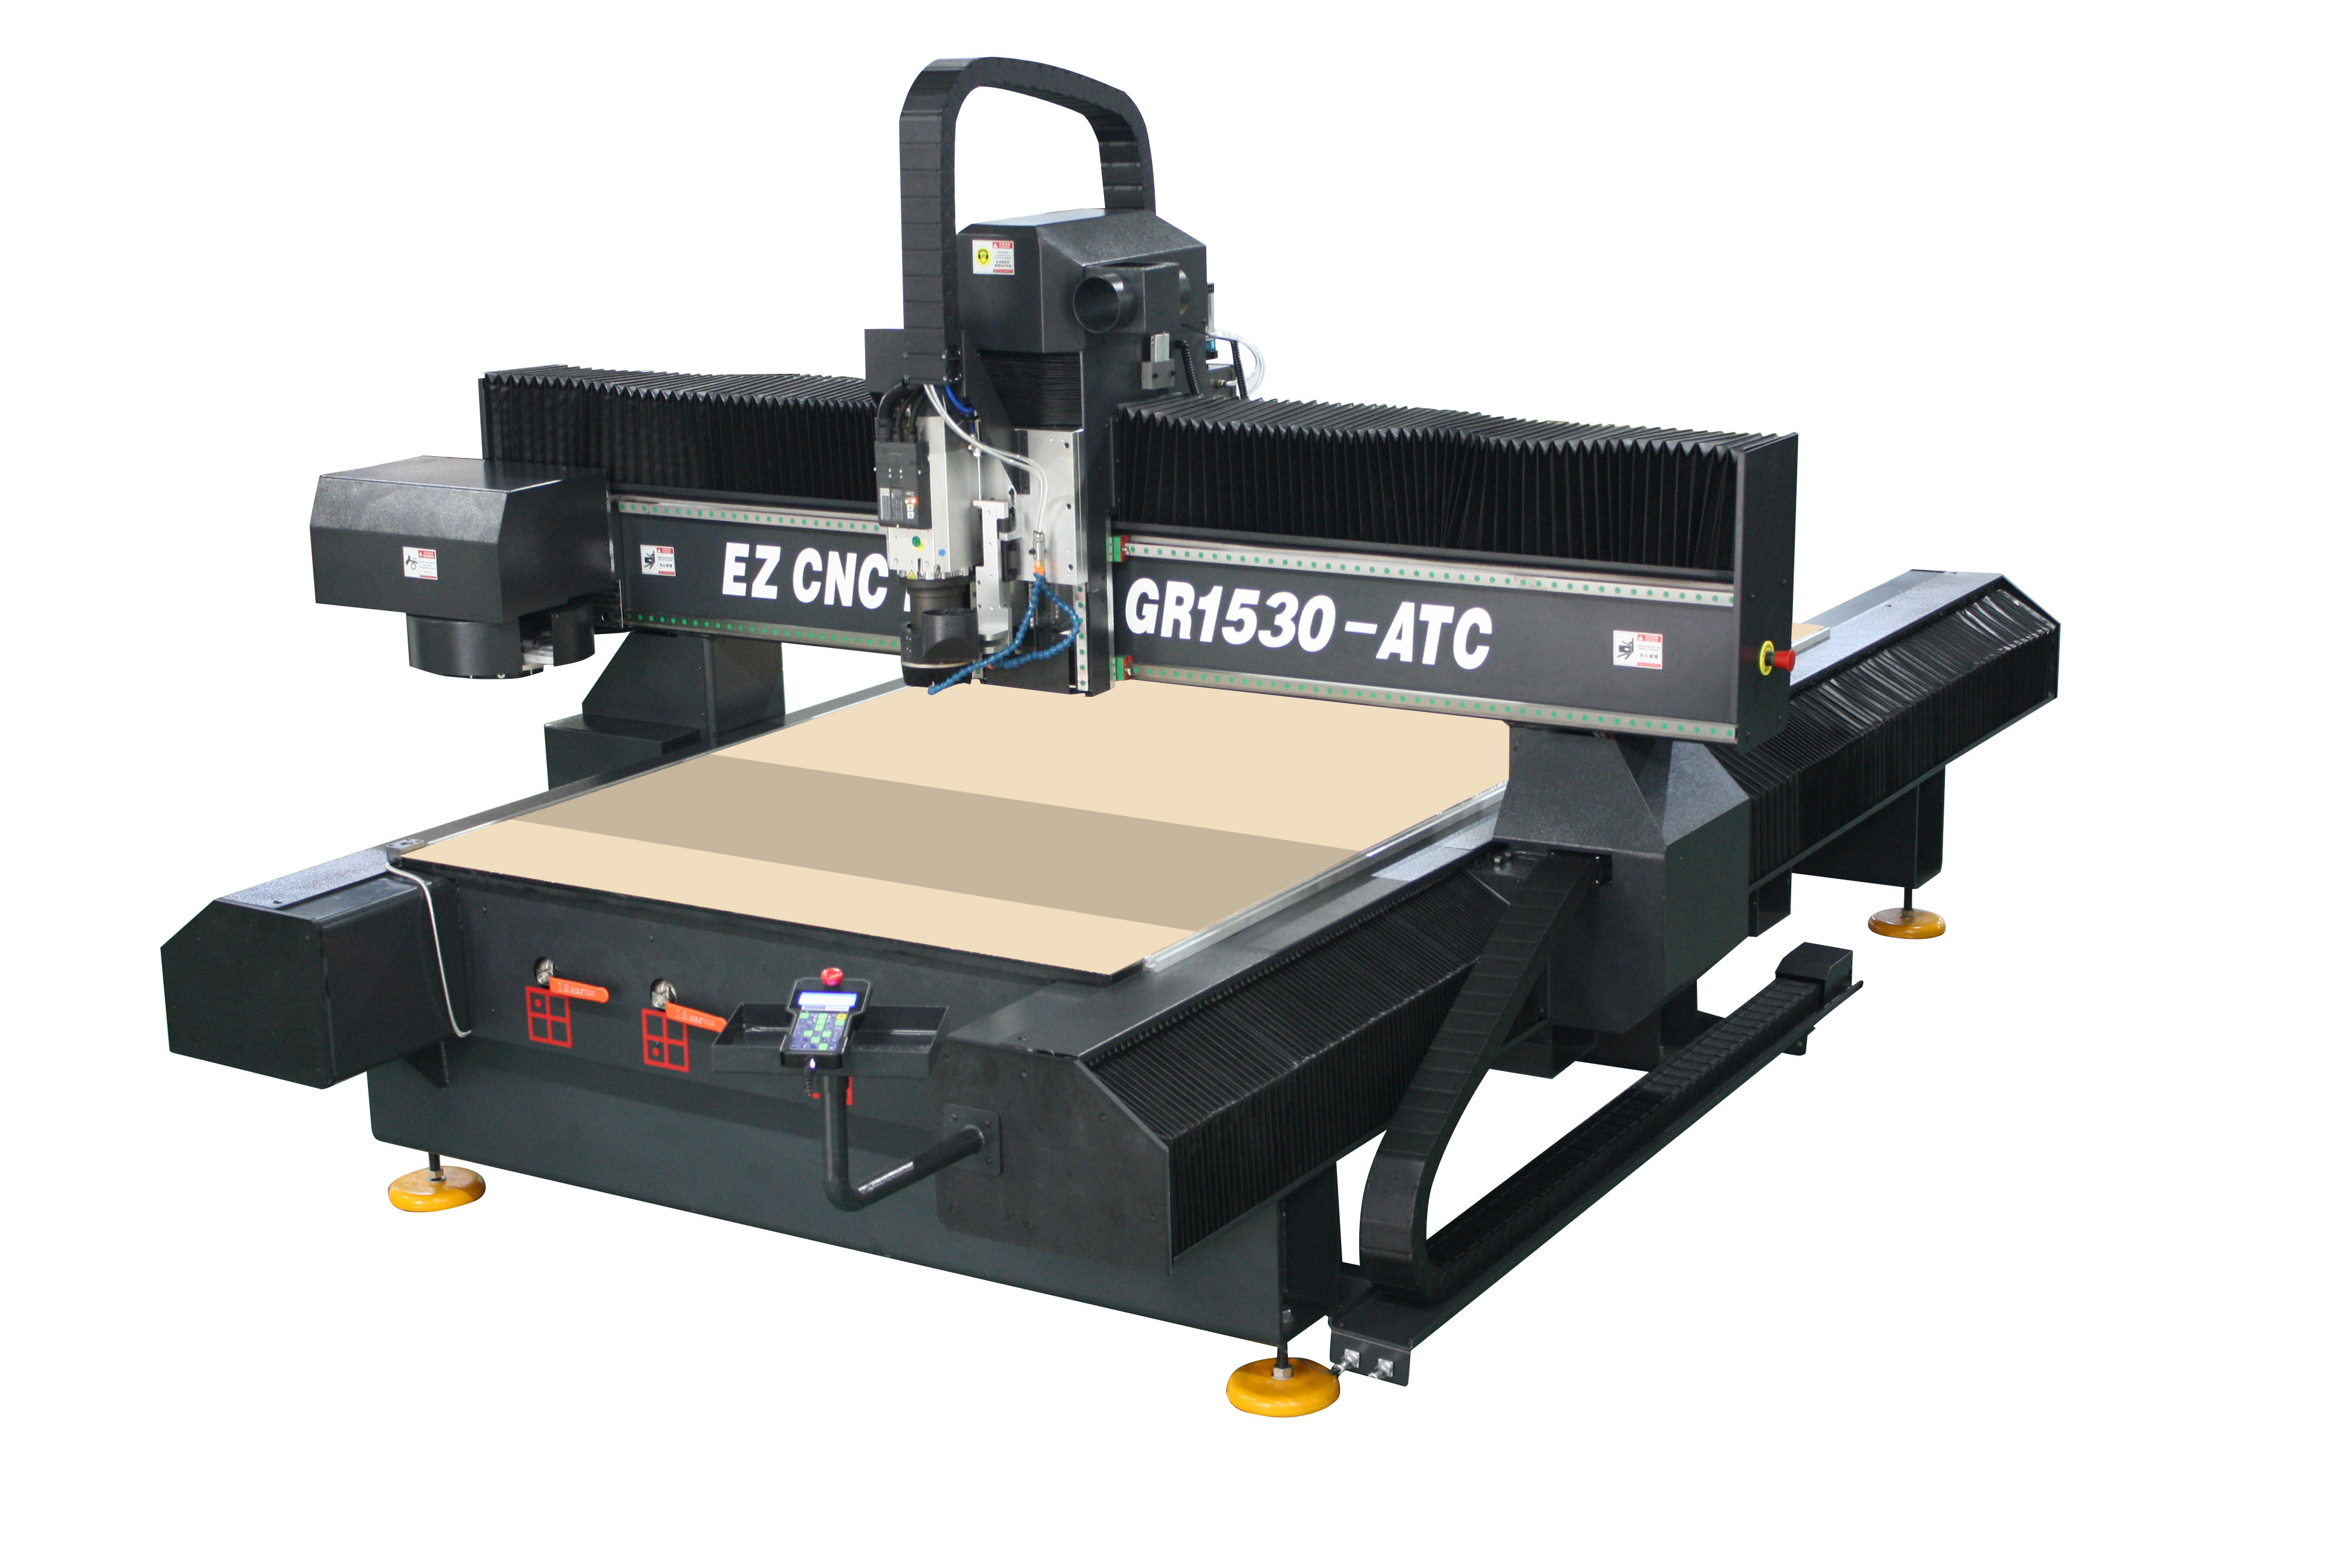  EZCNC Routers-GR 1530/Wood, Acrylic, Alu. 3D Surface; SolidSurface cutting, engraving and marking system Manufactures